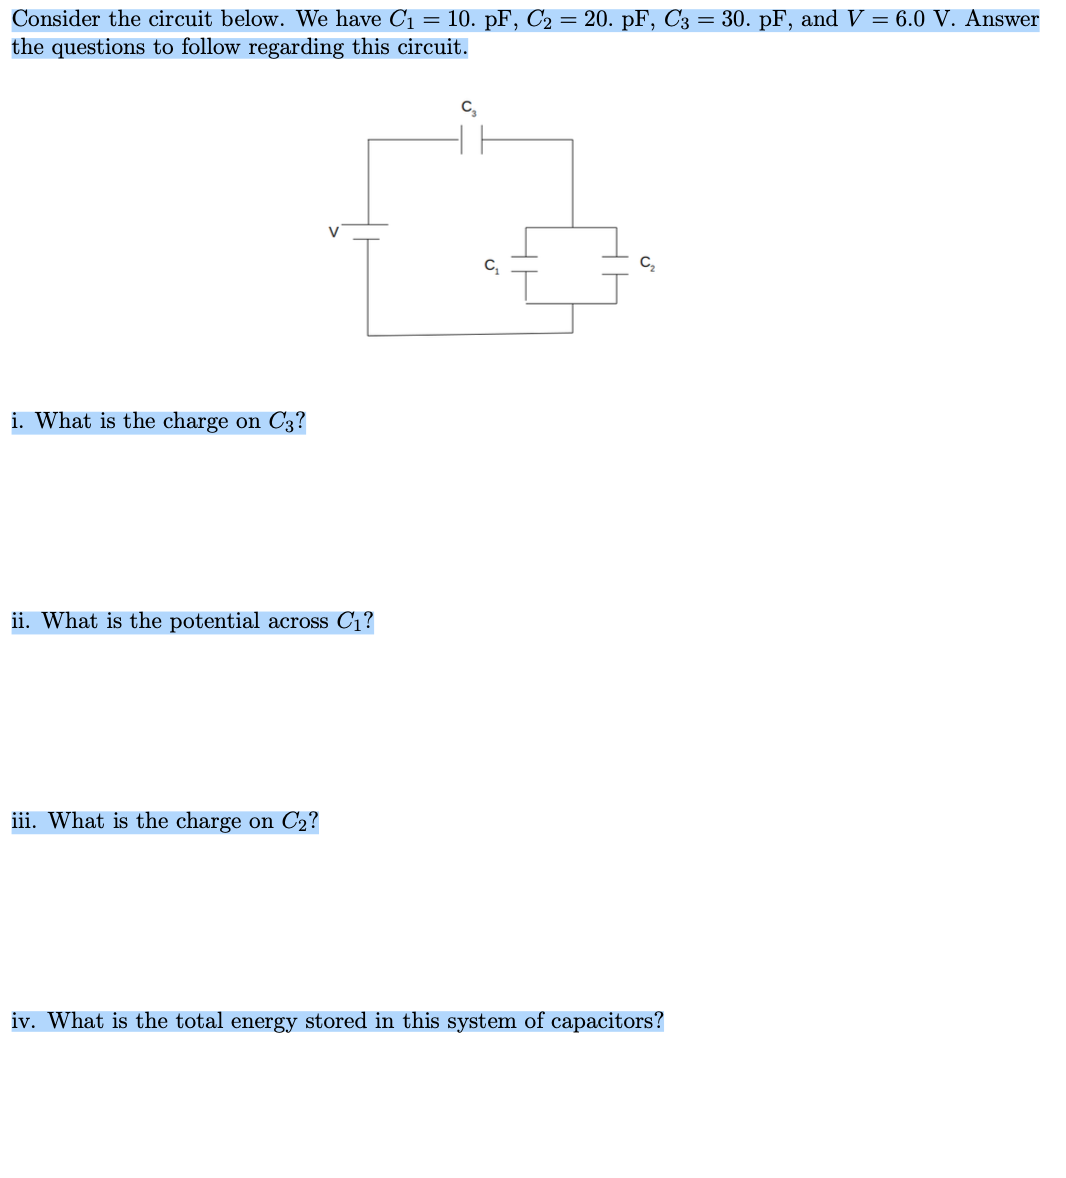 Consider the circuit below. We have C1 = 10. pF, C2 = 20. pF, C3 = 30. pF, and V = 6.0 V. Answer
the questions to follow regarding this circuit.
C,
i. What is the charge on C3?
ii. What is the potential across C1?
iii. What is the charge on C2?
iv. What is the total energy stored in this system of capacitors?
